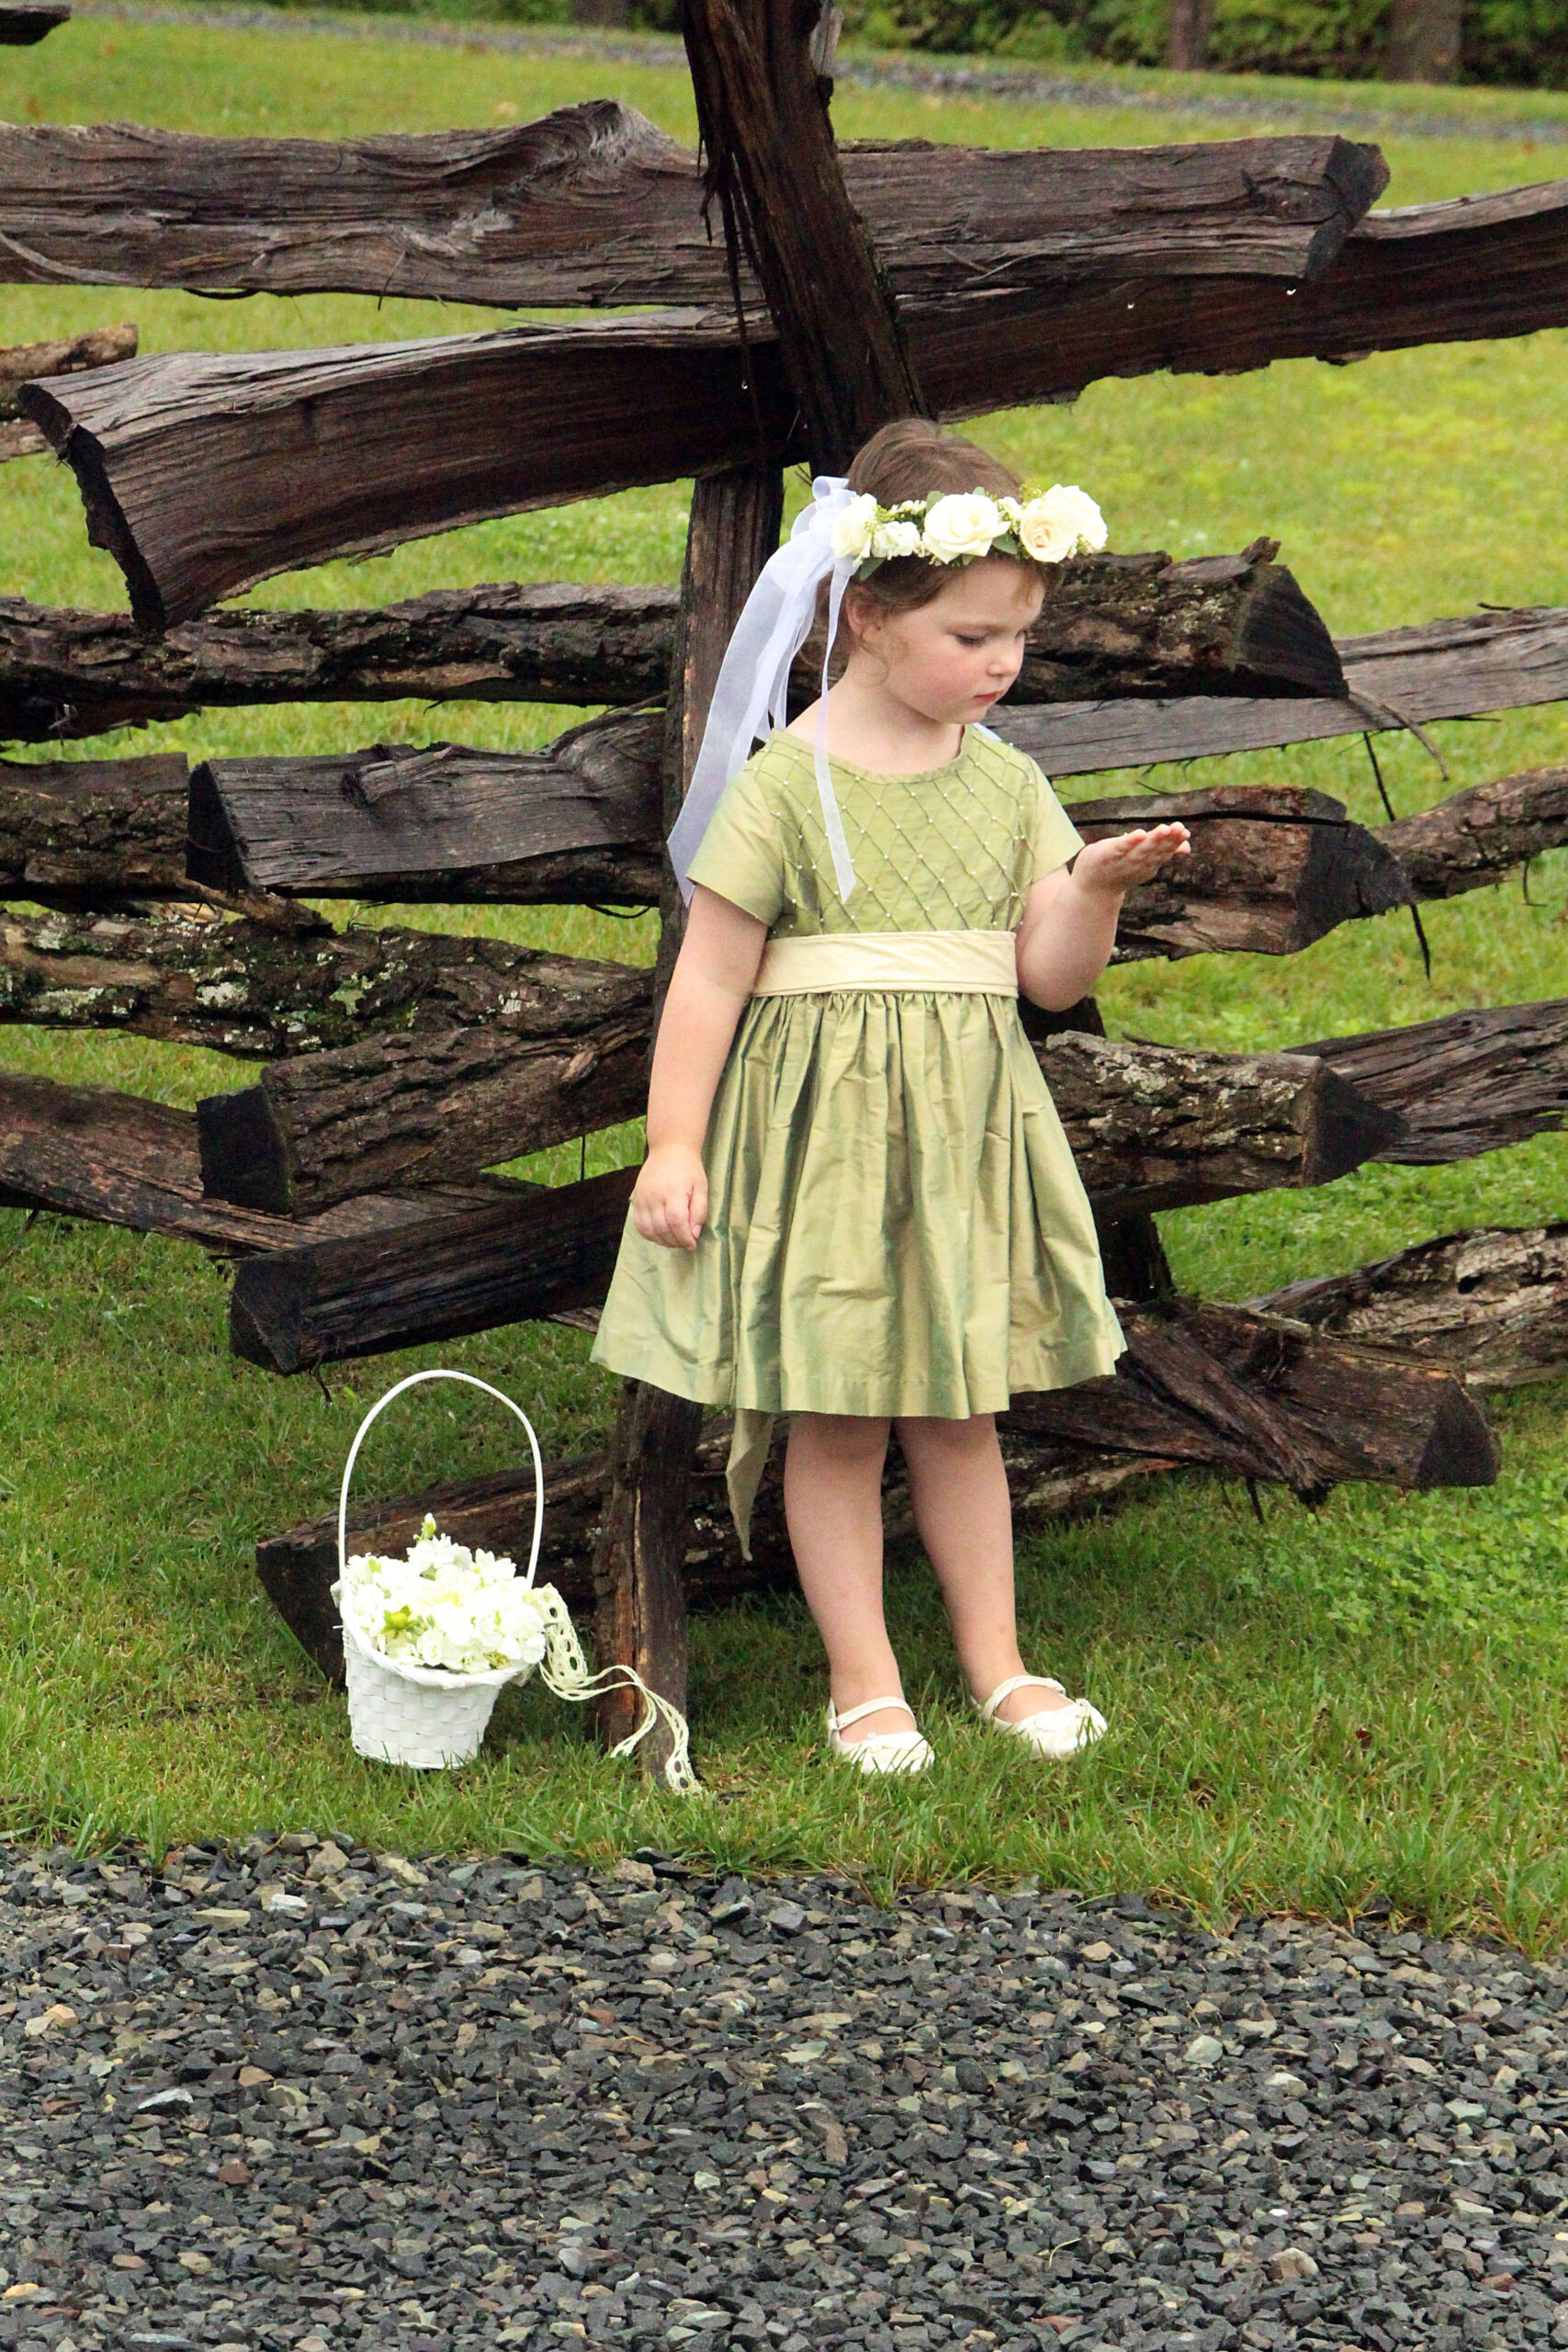 A little girl in a green dress standing next to a wooden fence.